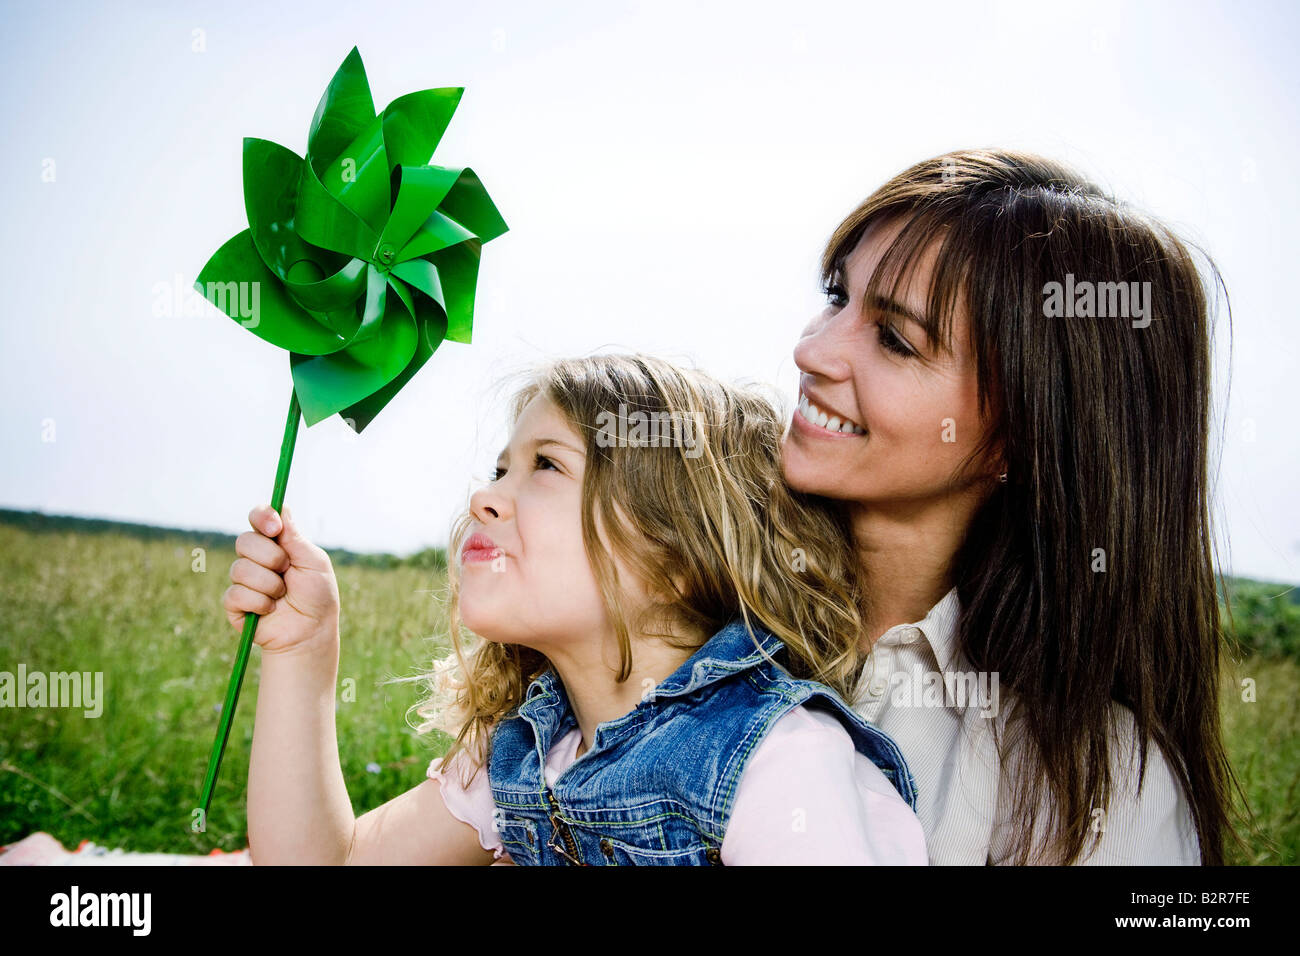 Woman and girl with toy windmill Stock Photo